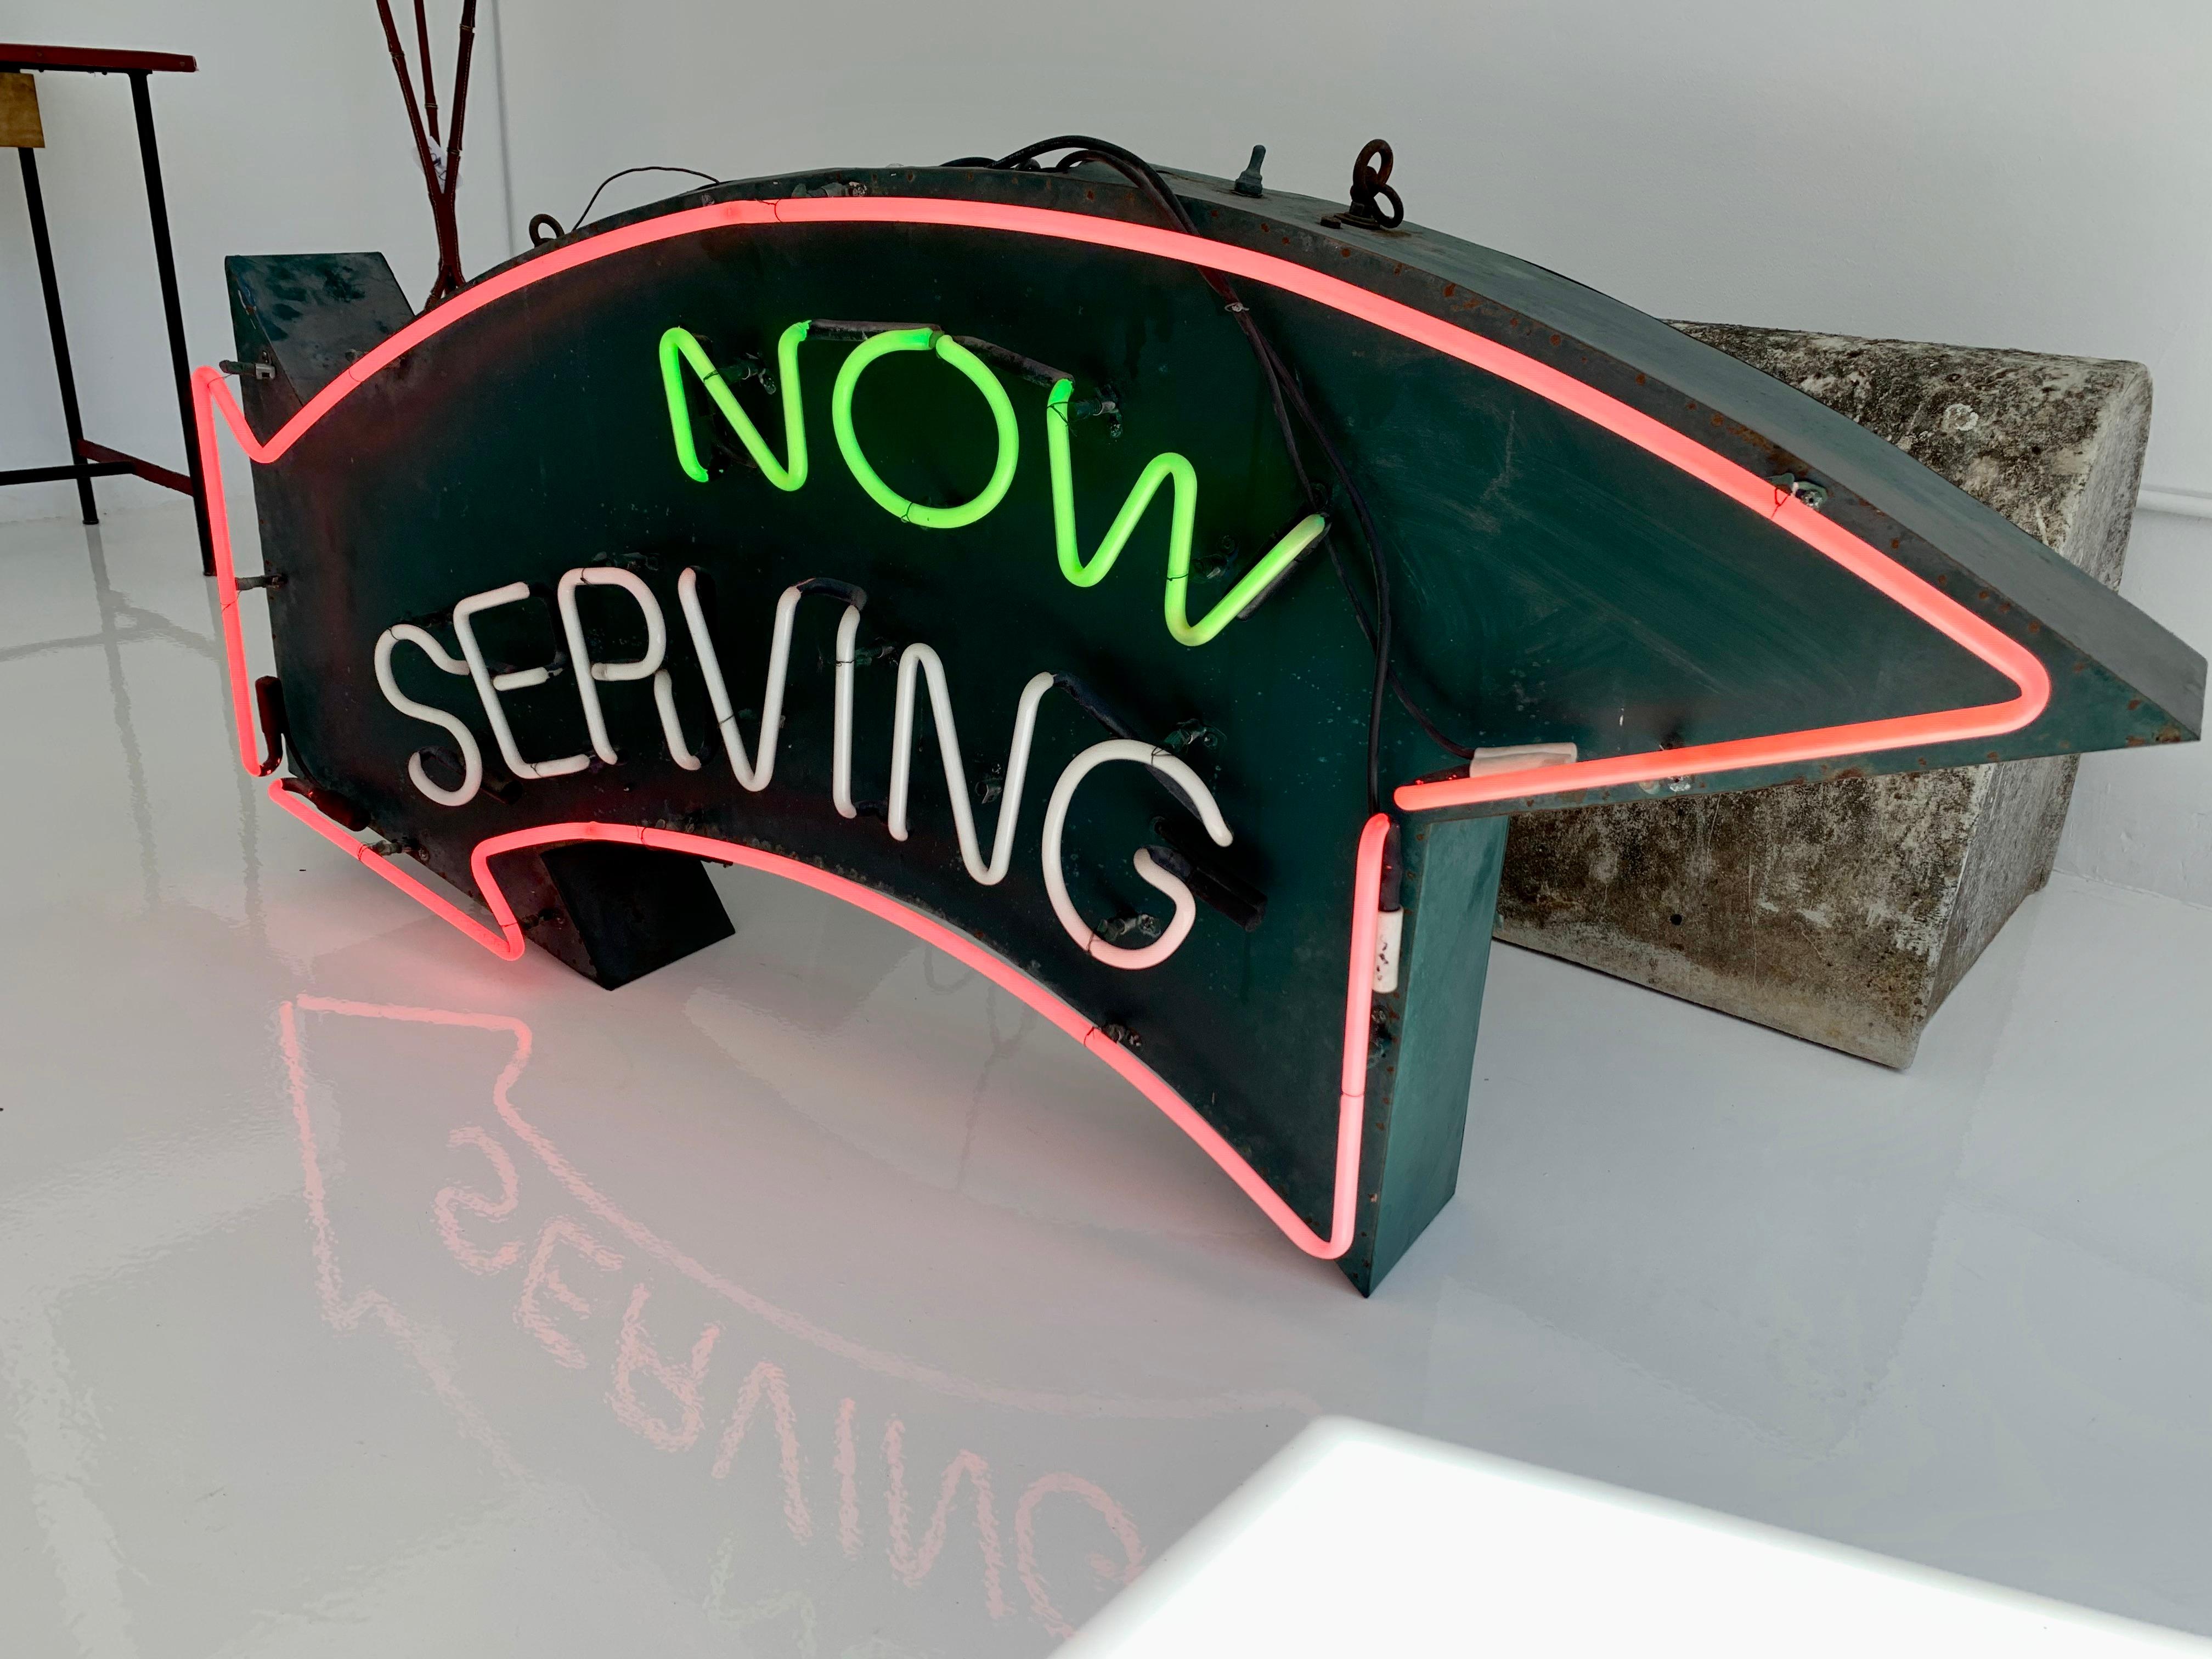 5 foot wide neon sign that says NOW SERVING. Vintage green metal arrow sign with neon lights attached. Hot pink neon borders the arrow as well as the word SERVING. The word NOW is in green neon. Able to turn off the wording so just the arrow lights